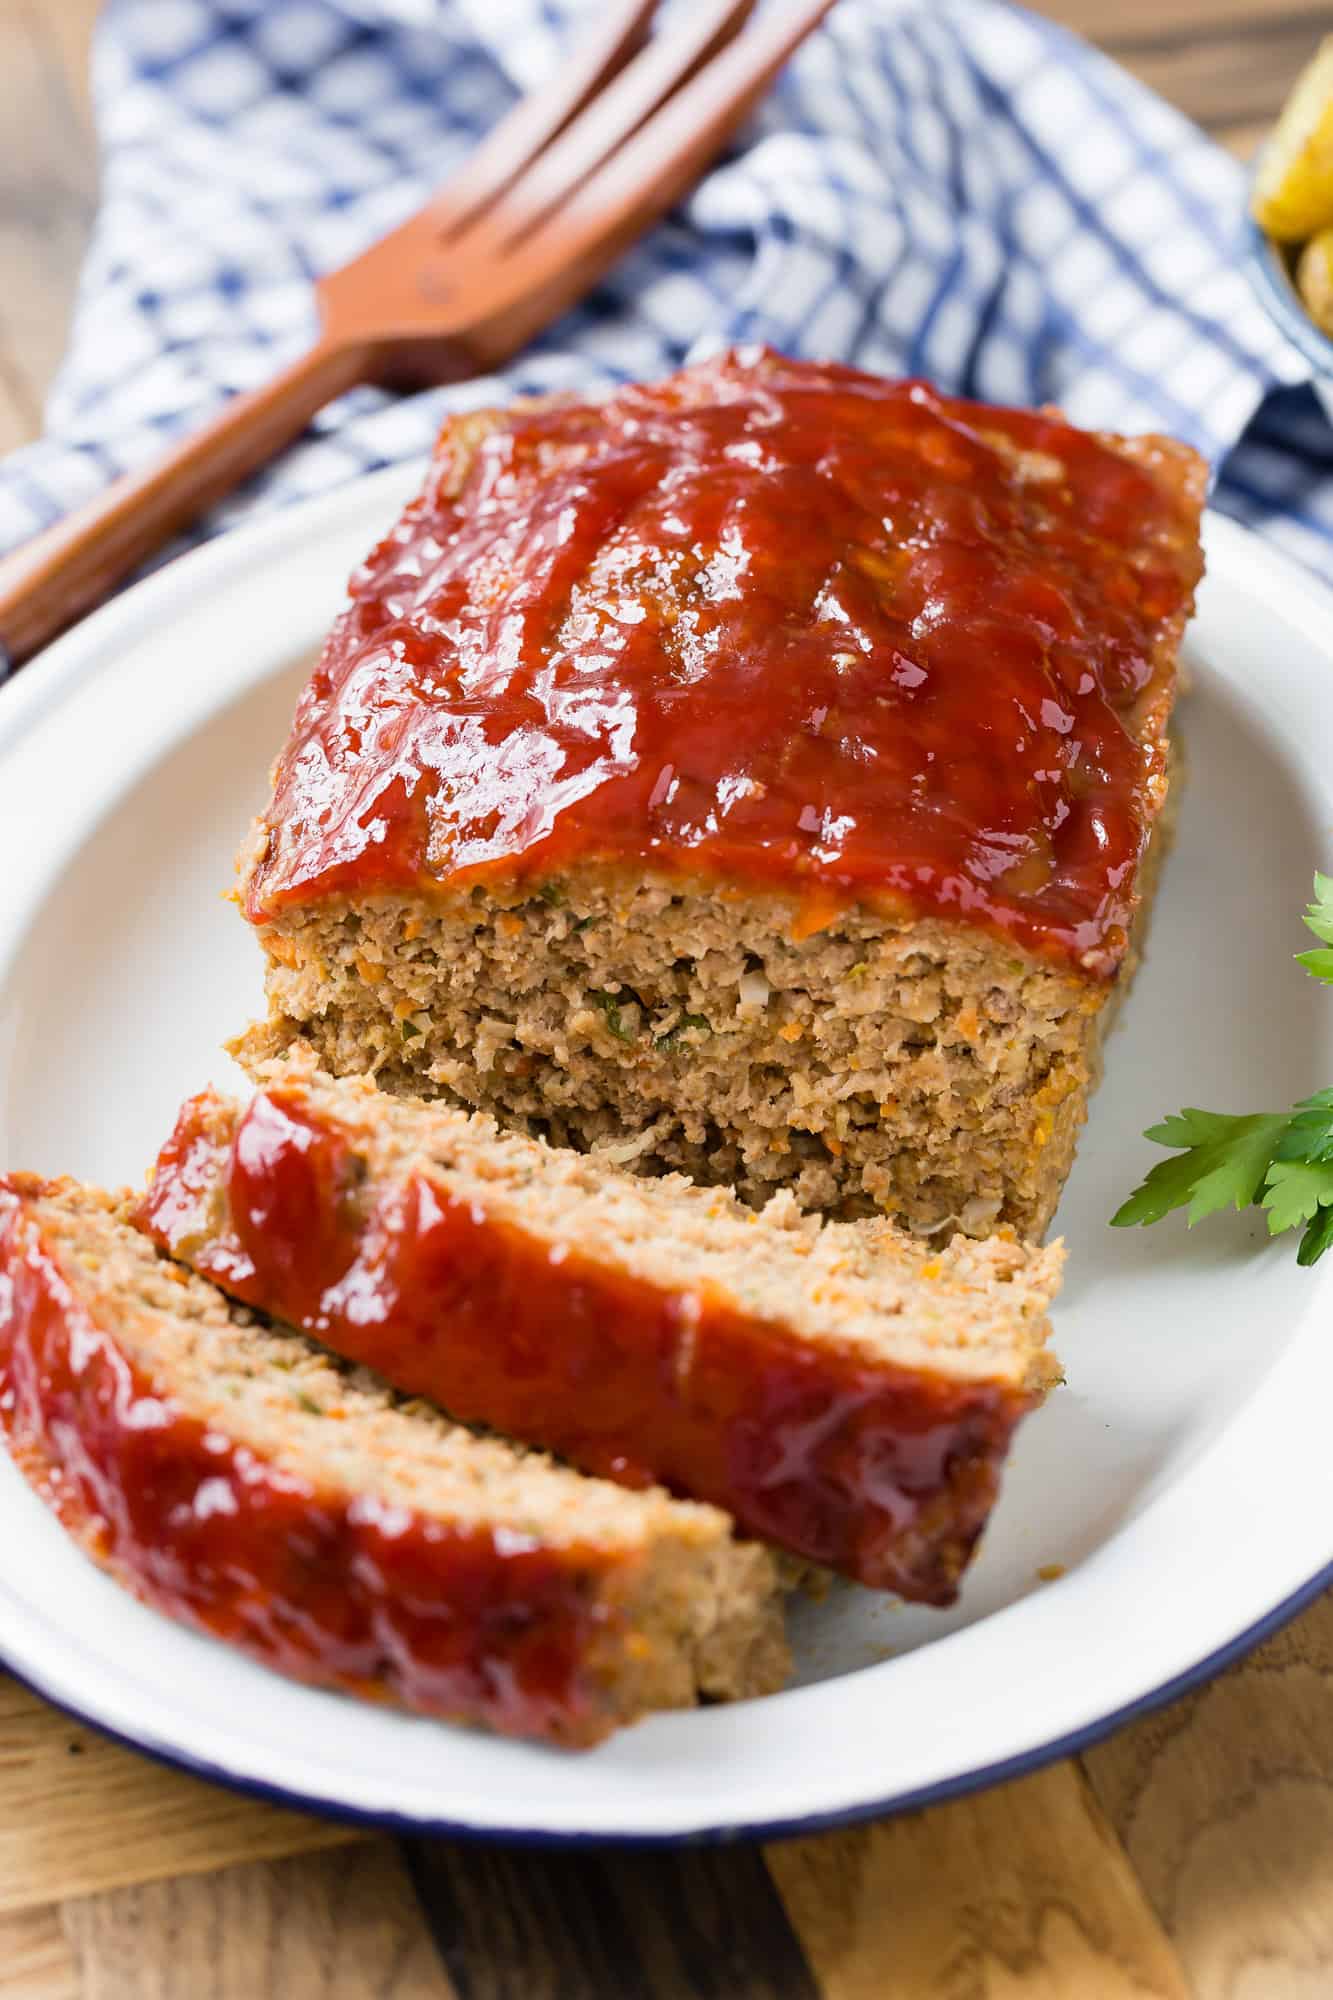 Homemade meatloaf on a platter, partially sliced.